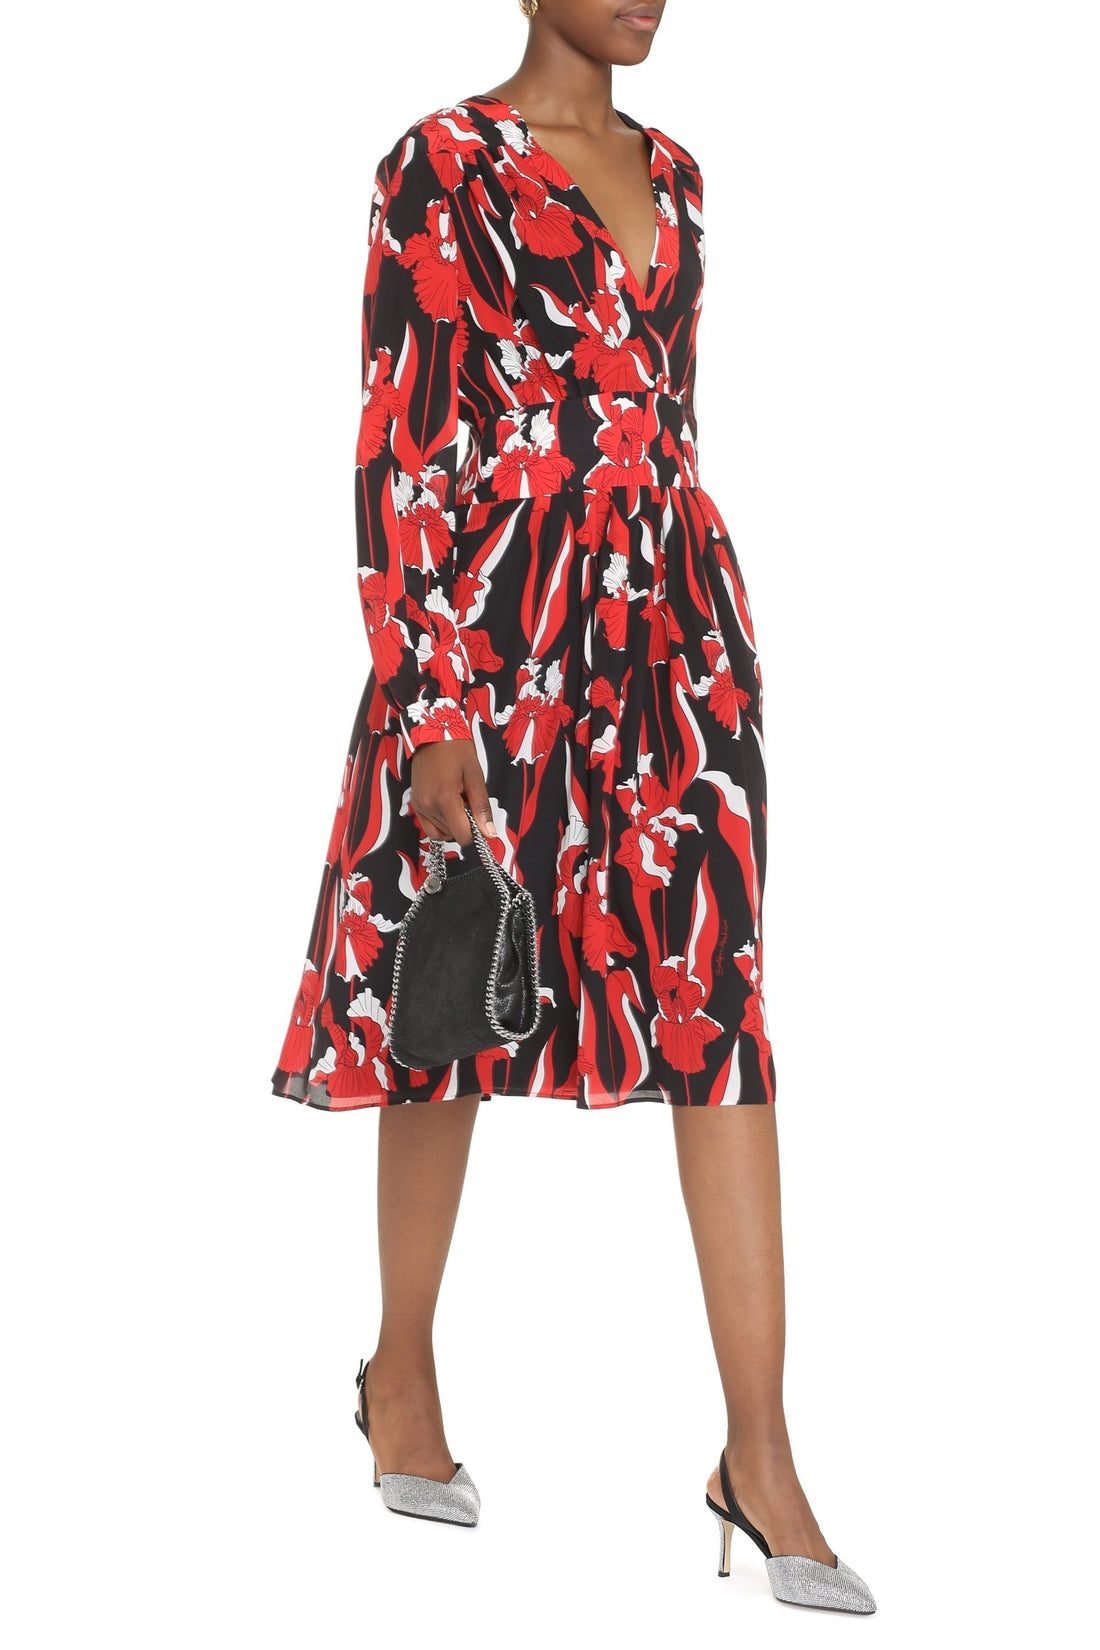 Boutique Moschino-OUTLET-SALE-Printed crepe dress-ARCHIVIST